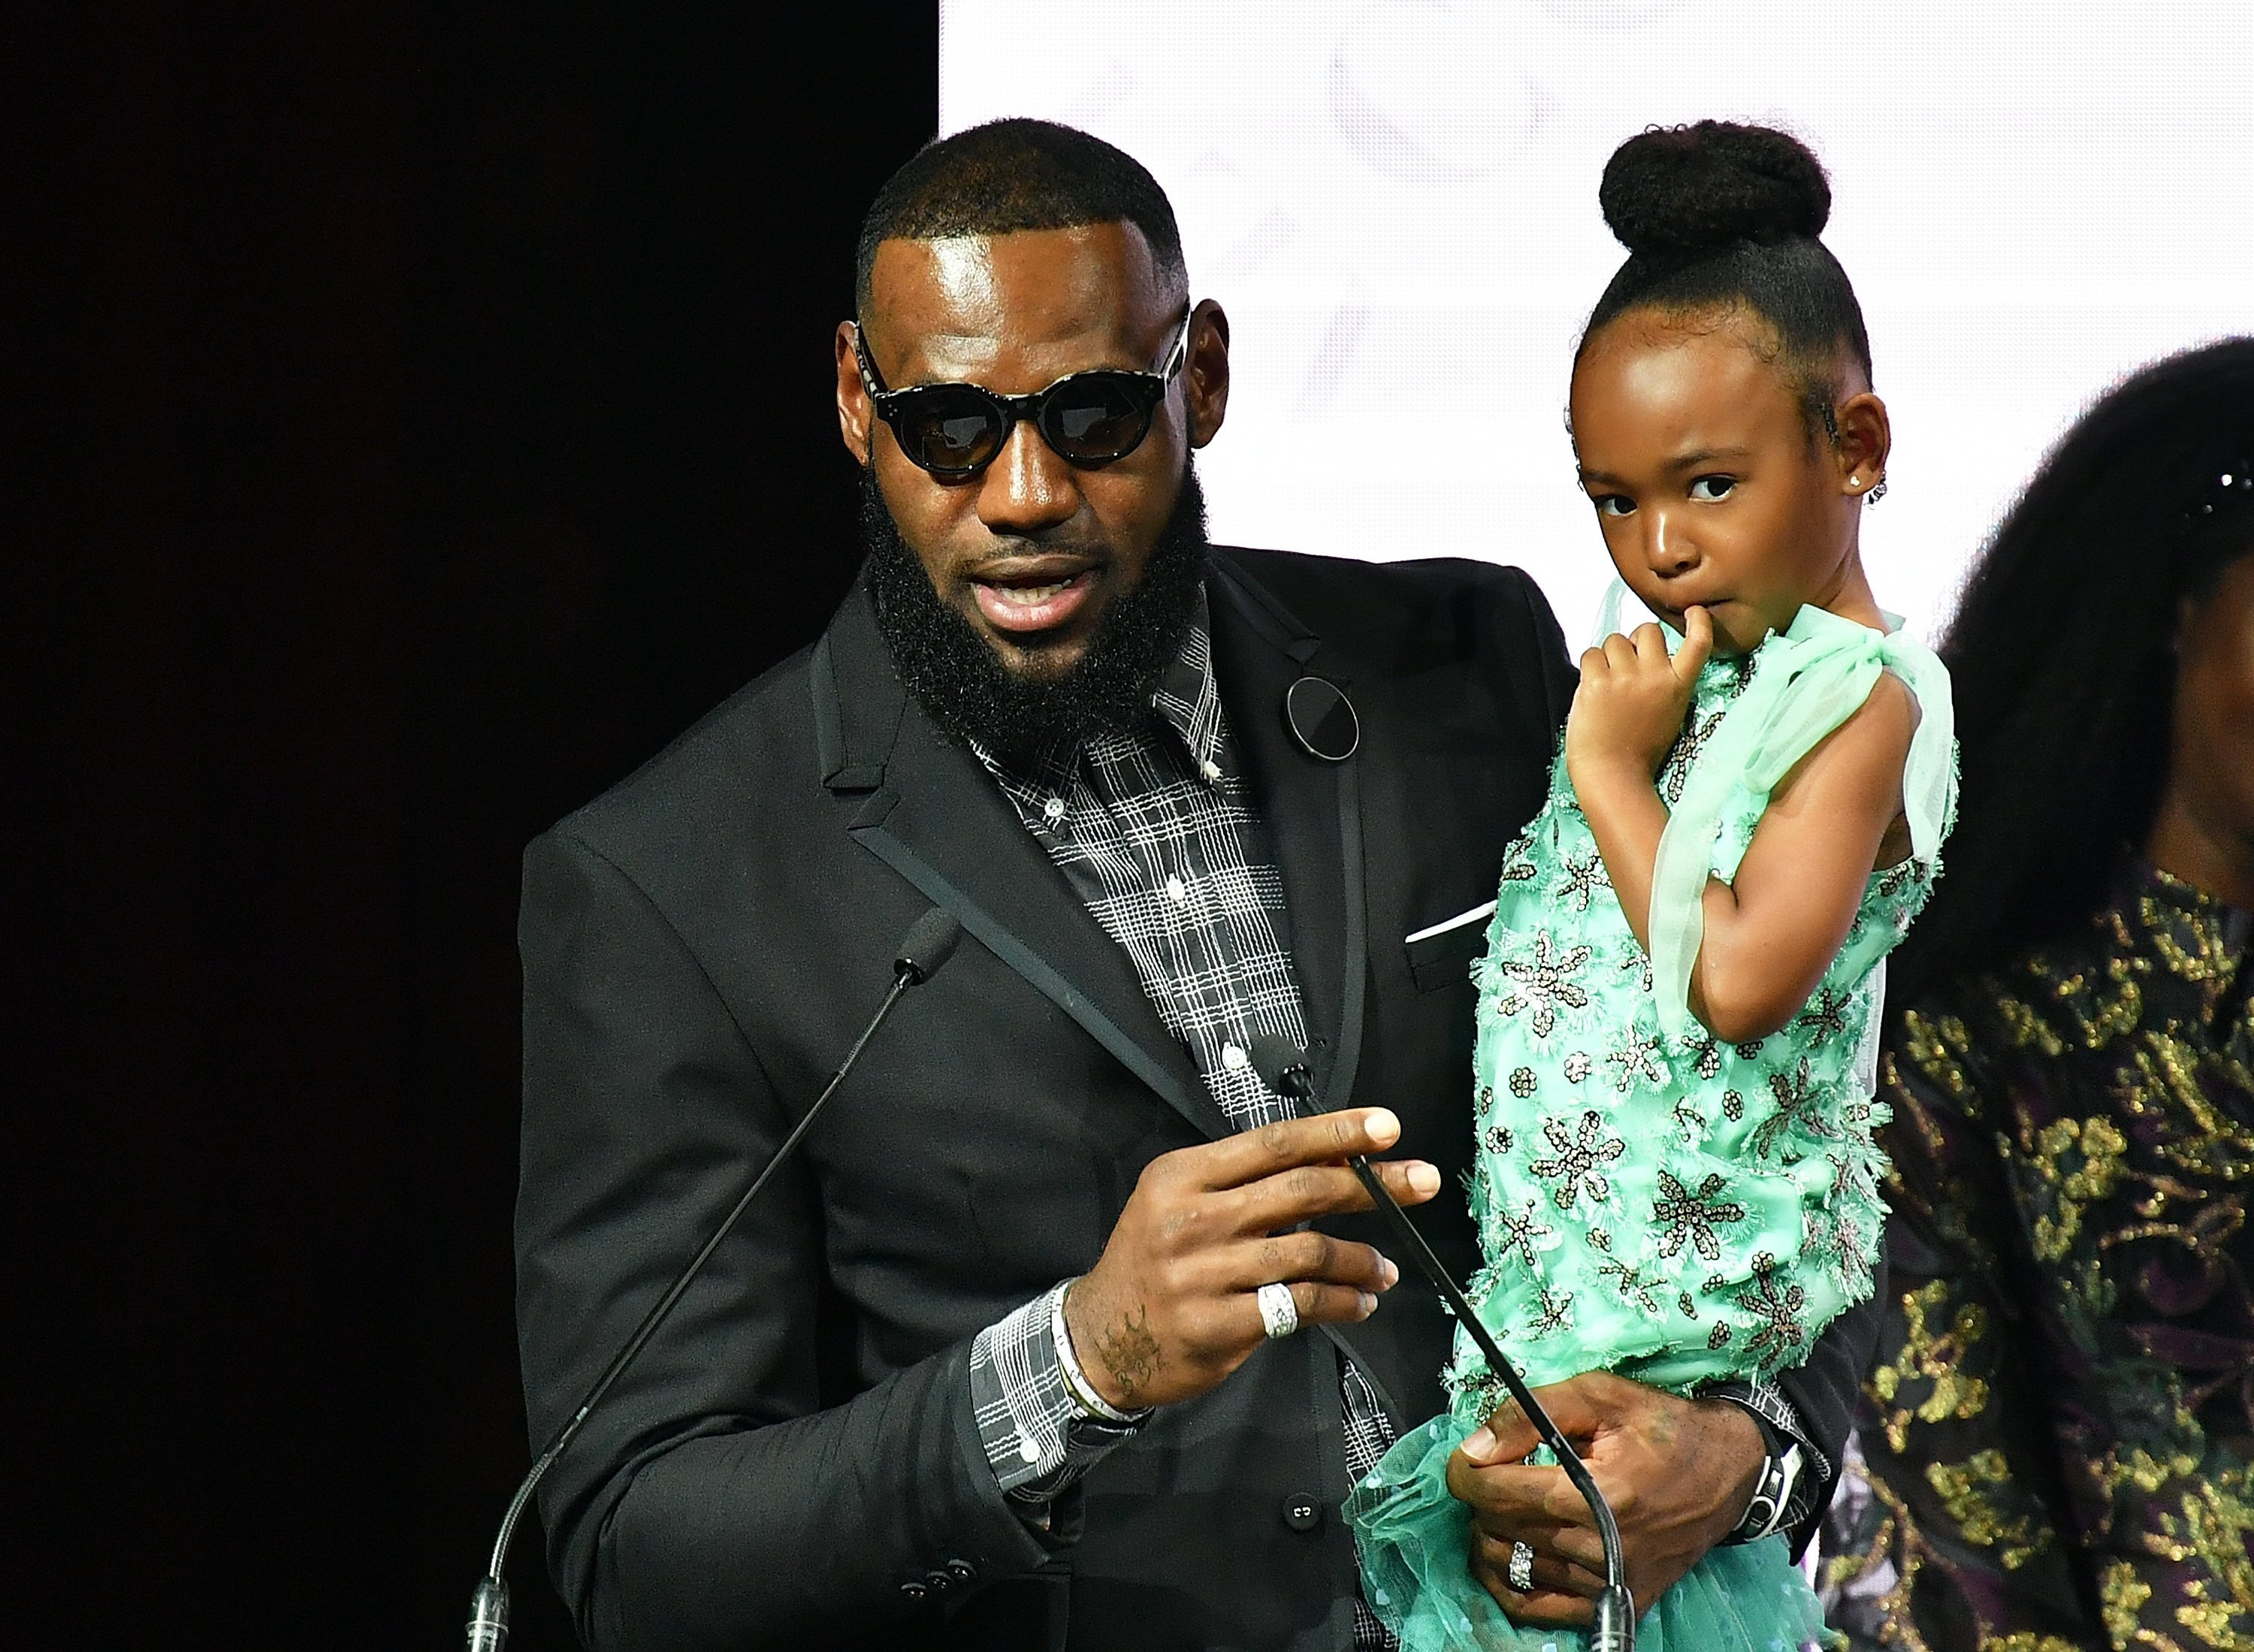 LeBron James, and daughter Zhuri James attend Harlem's Fashion Row during New York Fahion Week | Photo: Getty Image